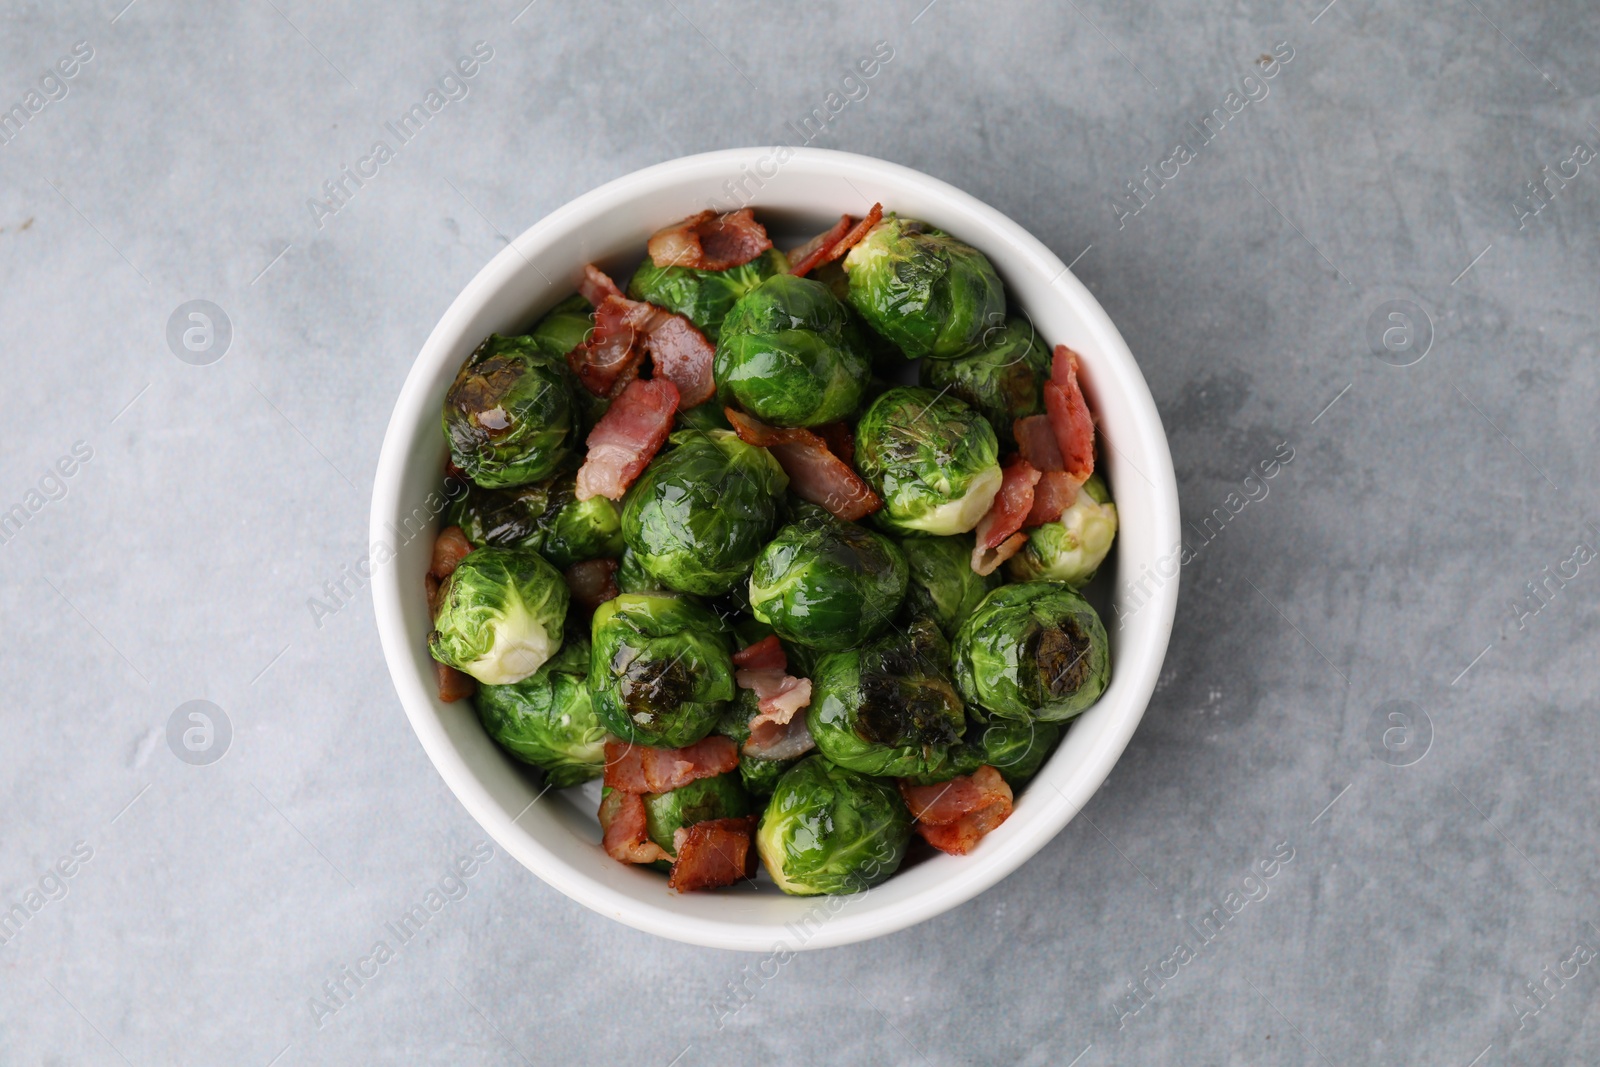 Photo of Delicious roasted Brussels sprouts and bacon in bowl on grey table, top view